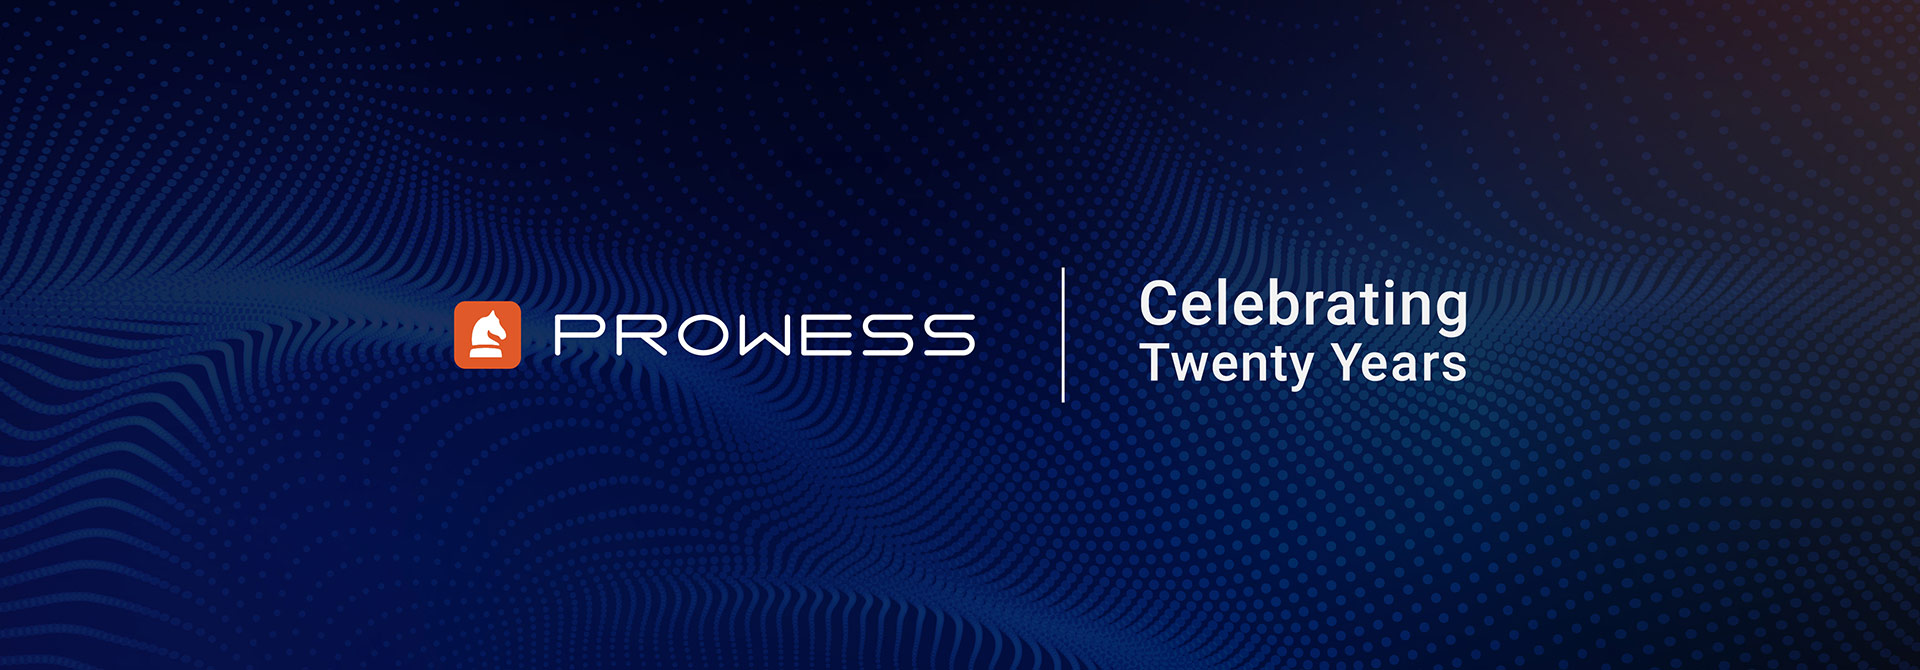 Celebrating Two Decades as a Creative and Technical Powerhouse